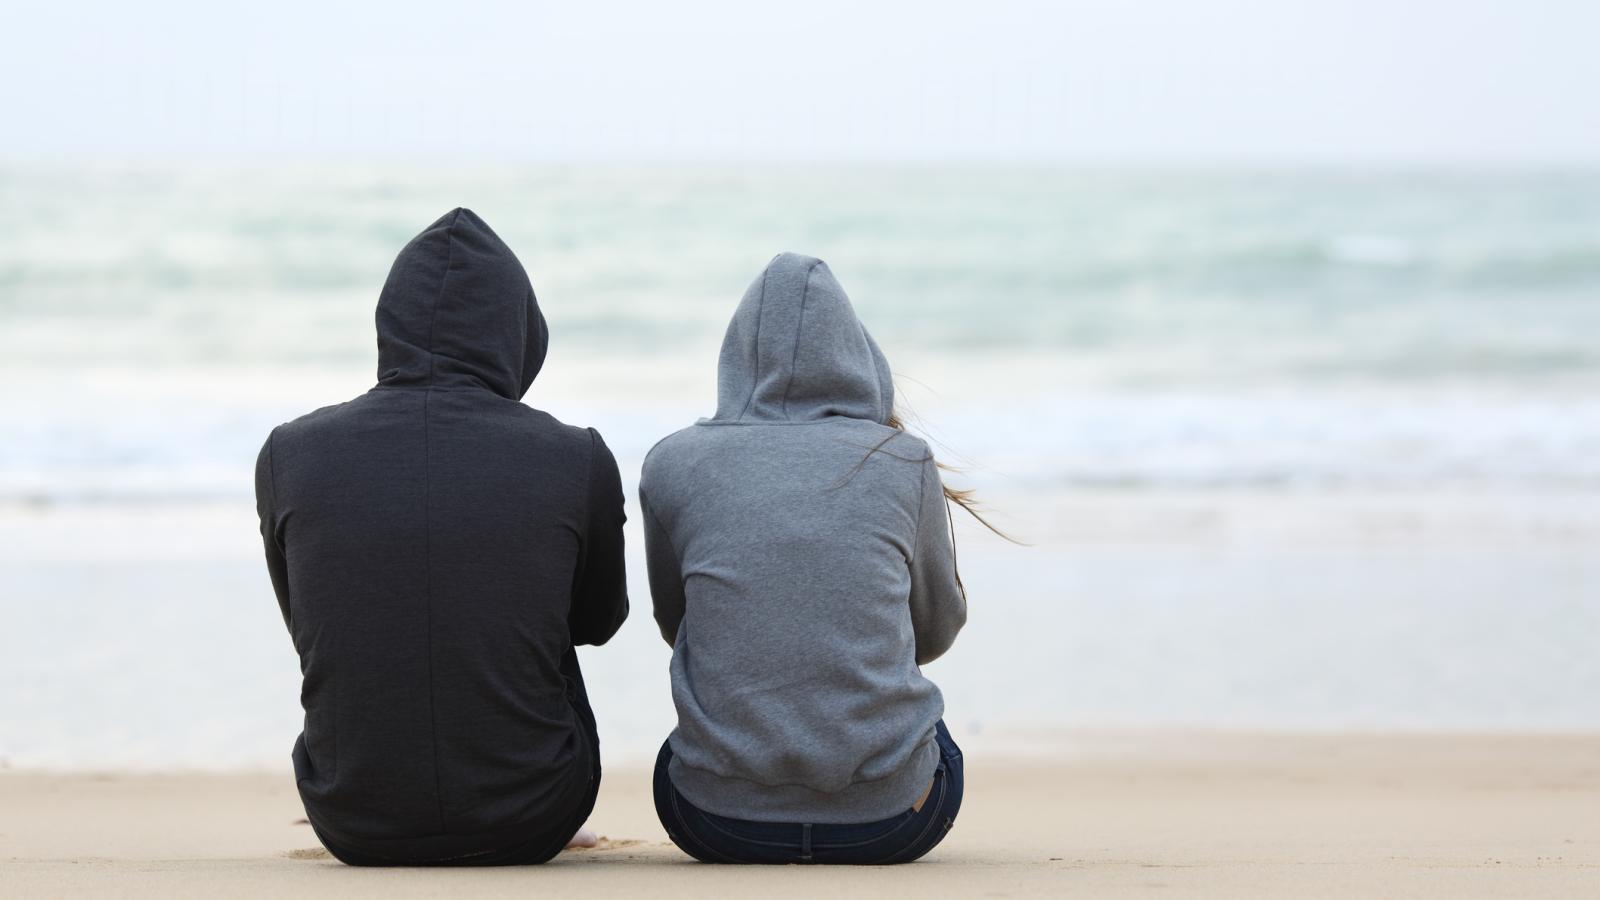 a view from behind of two people sitting on a beach looking our to sea. Both are wearing hooded sweatshirts